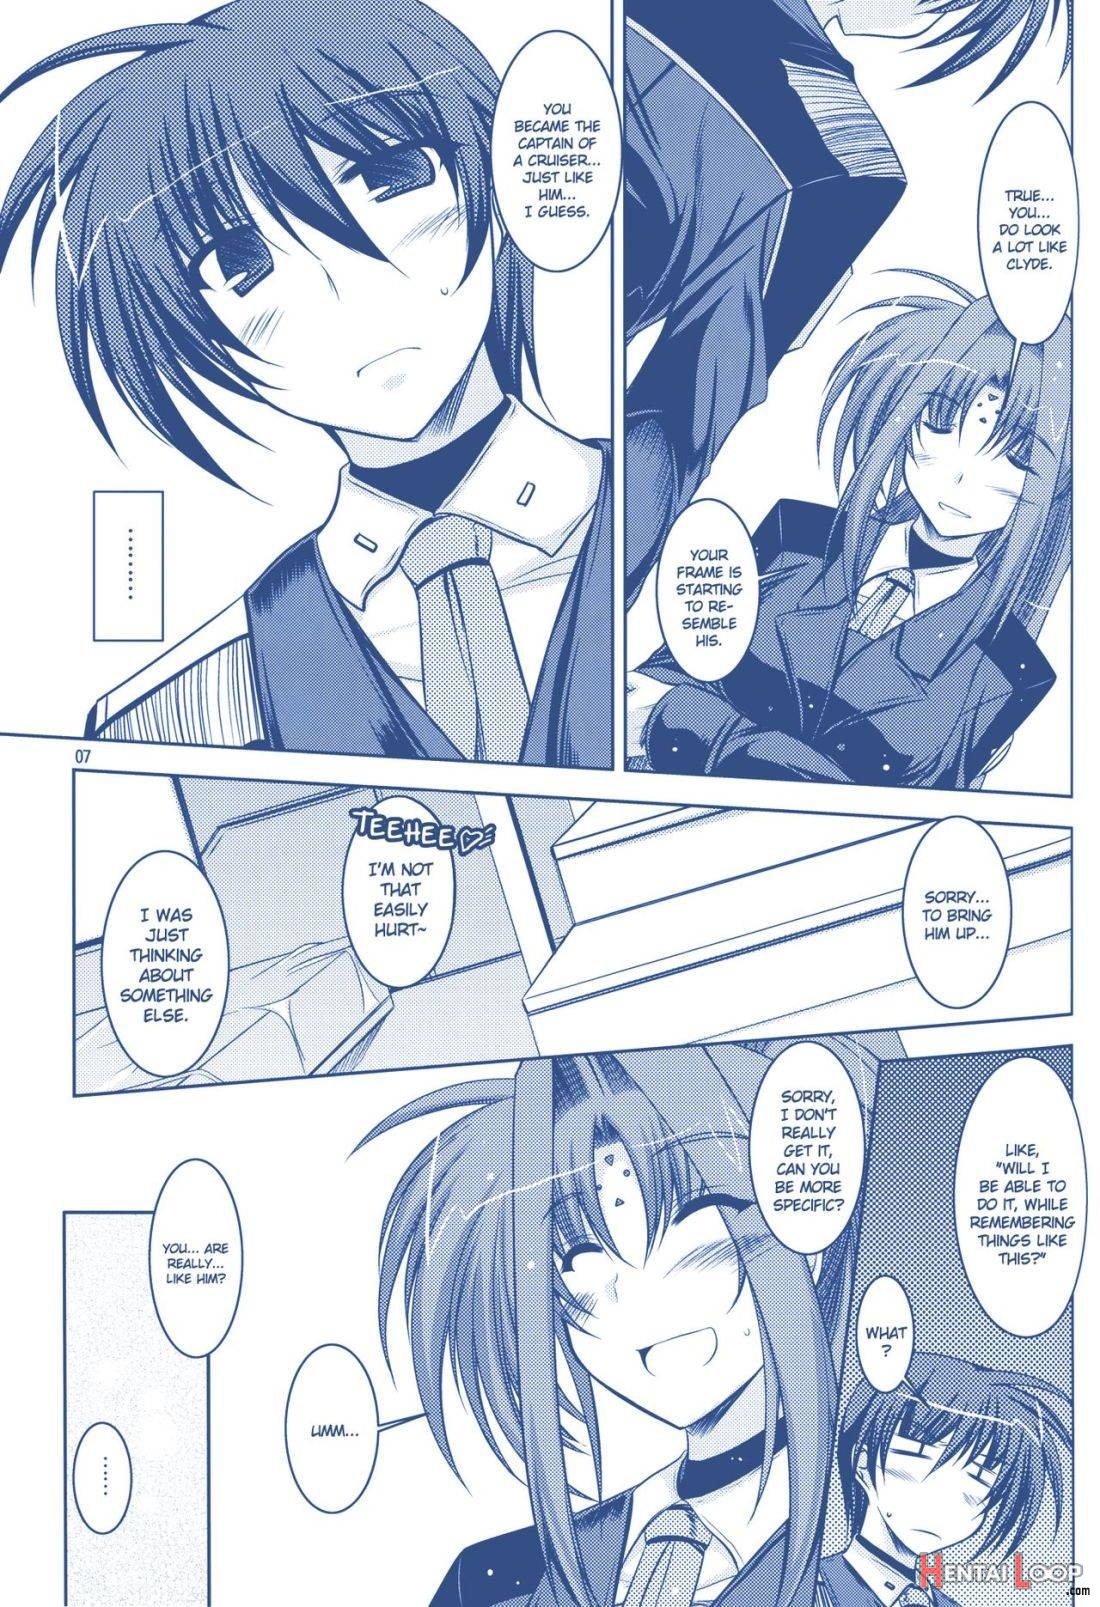 ANOTHER FRONTIER 02 Magical Girl Lyrical Lindy-san #03 page 6